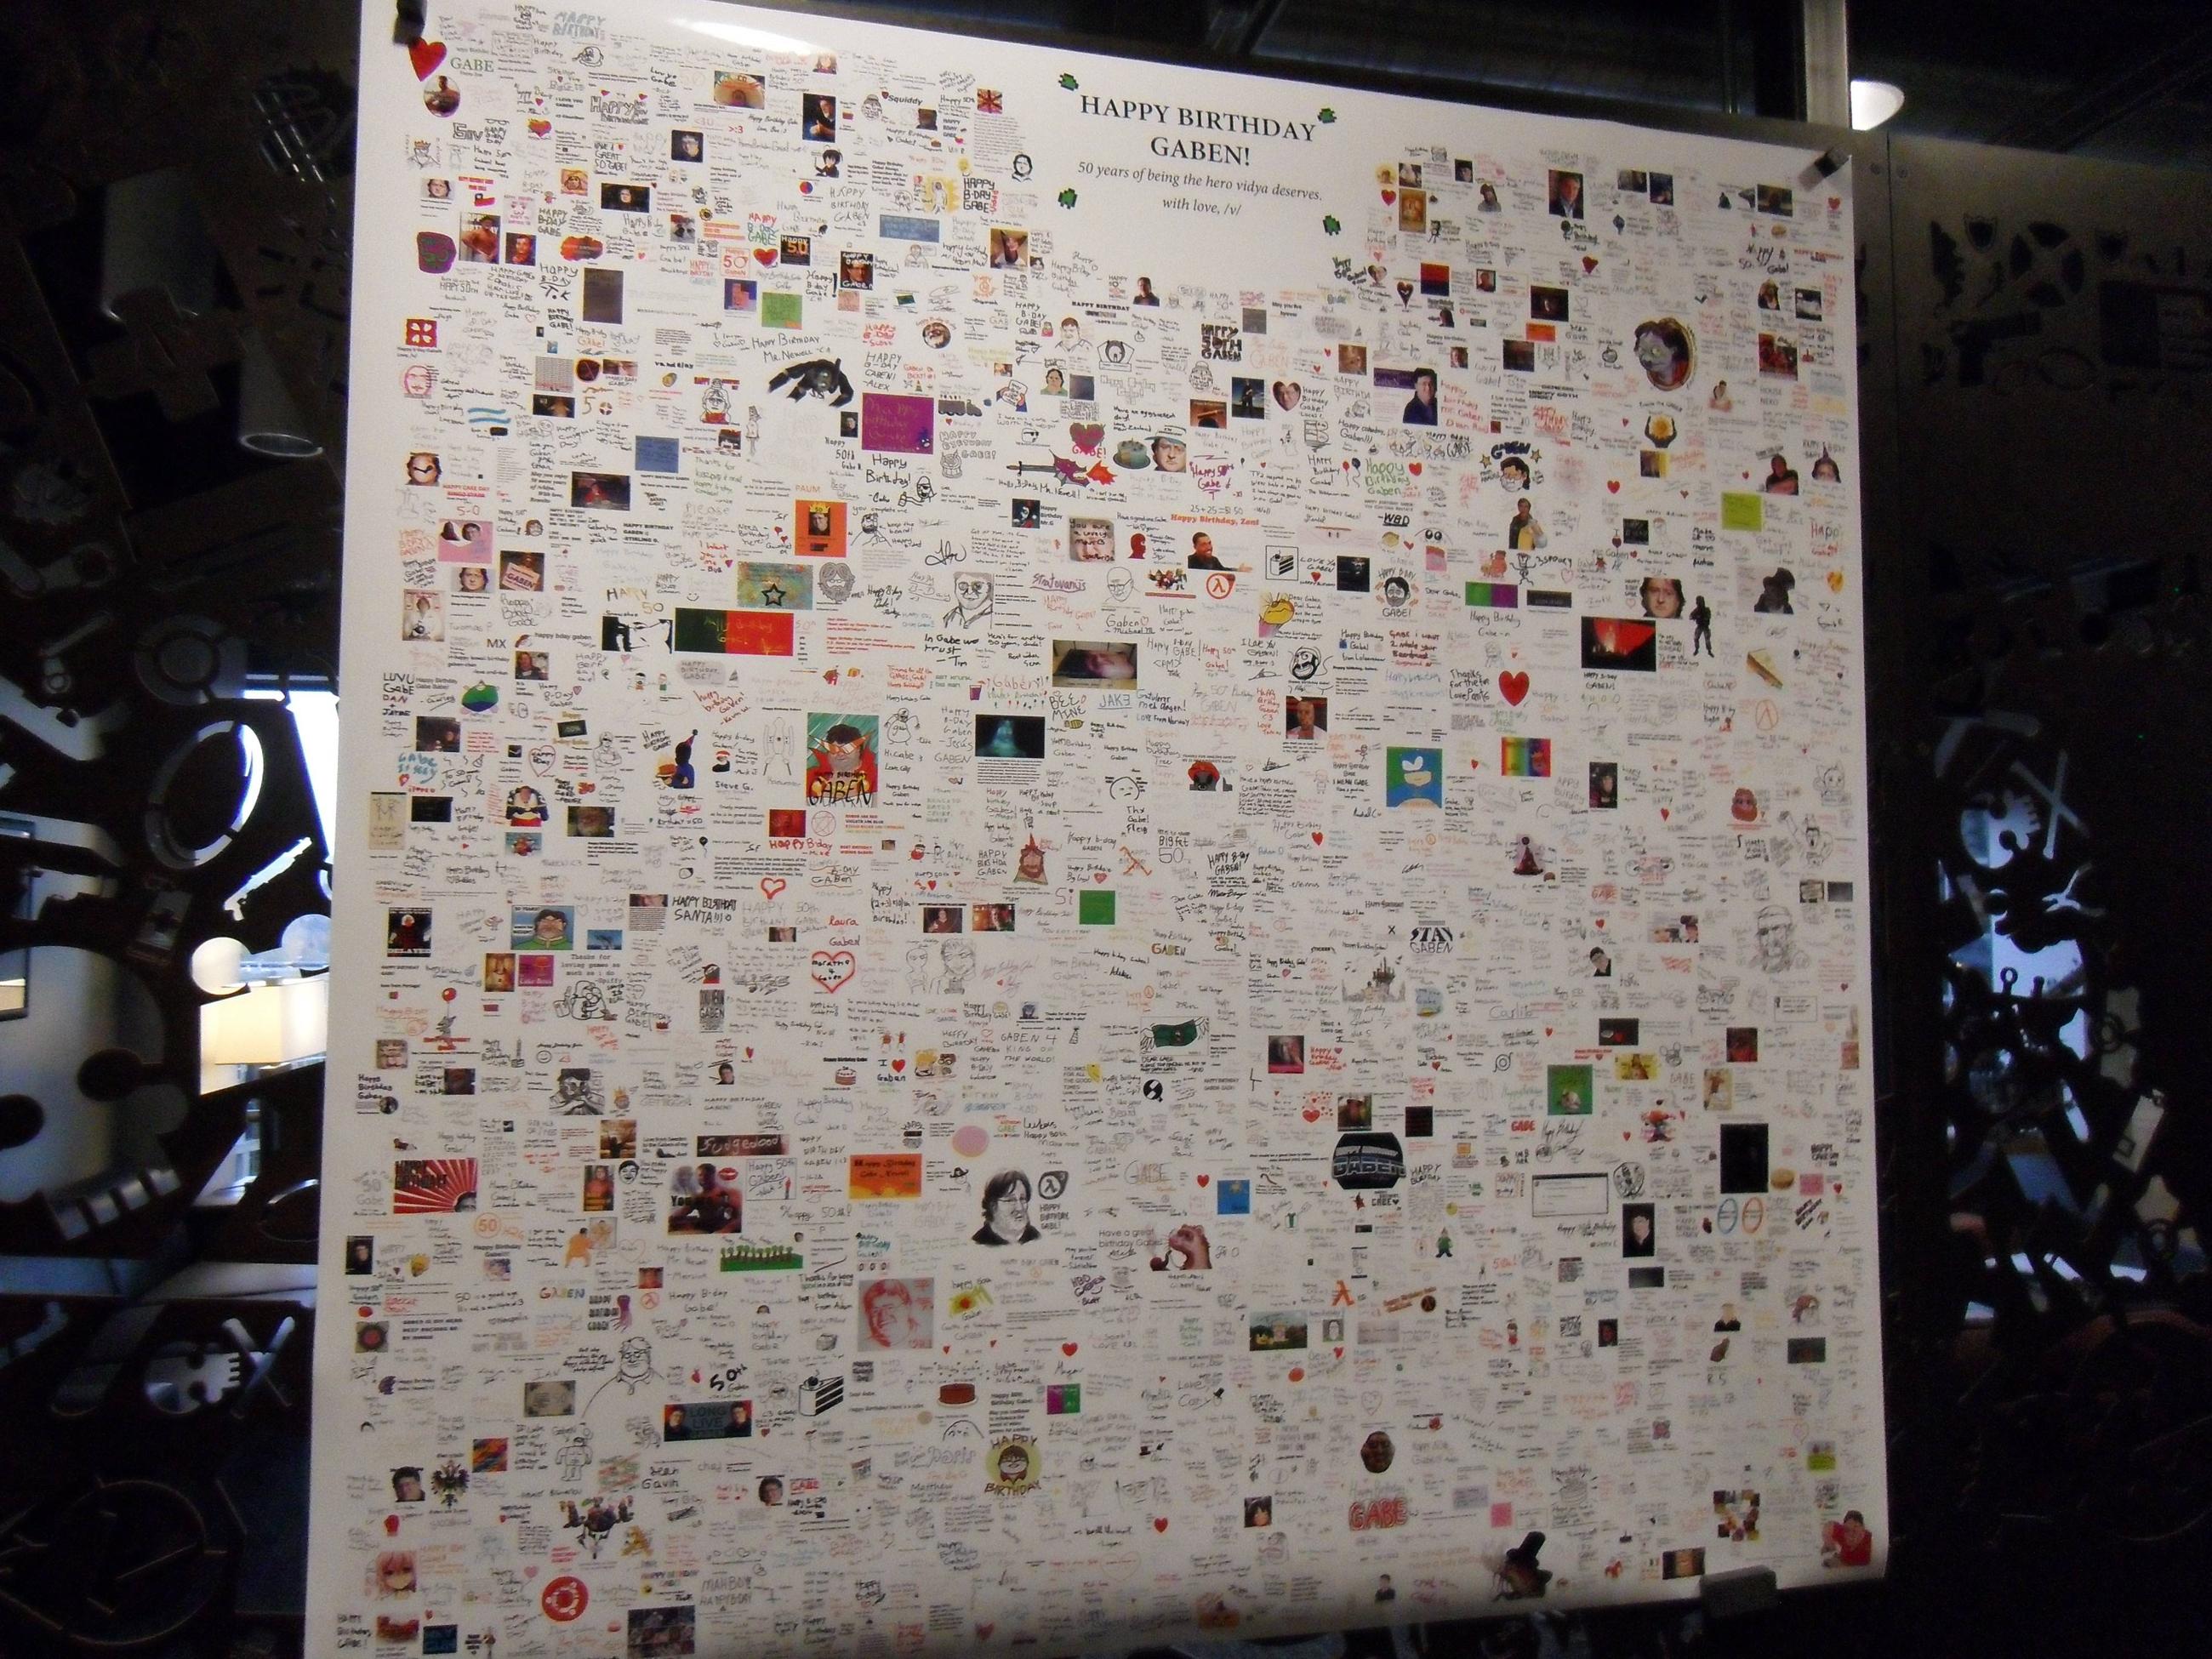 Valve’s Gabe Newell Gets Giant Birthday Card from 4chan.